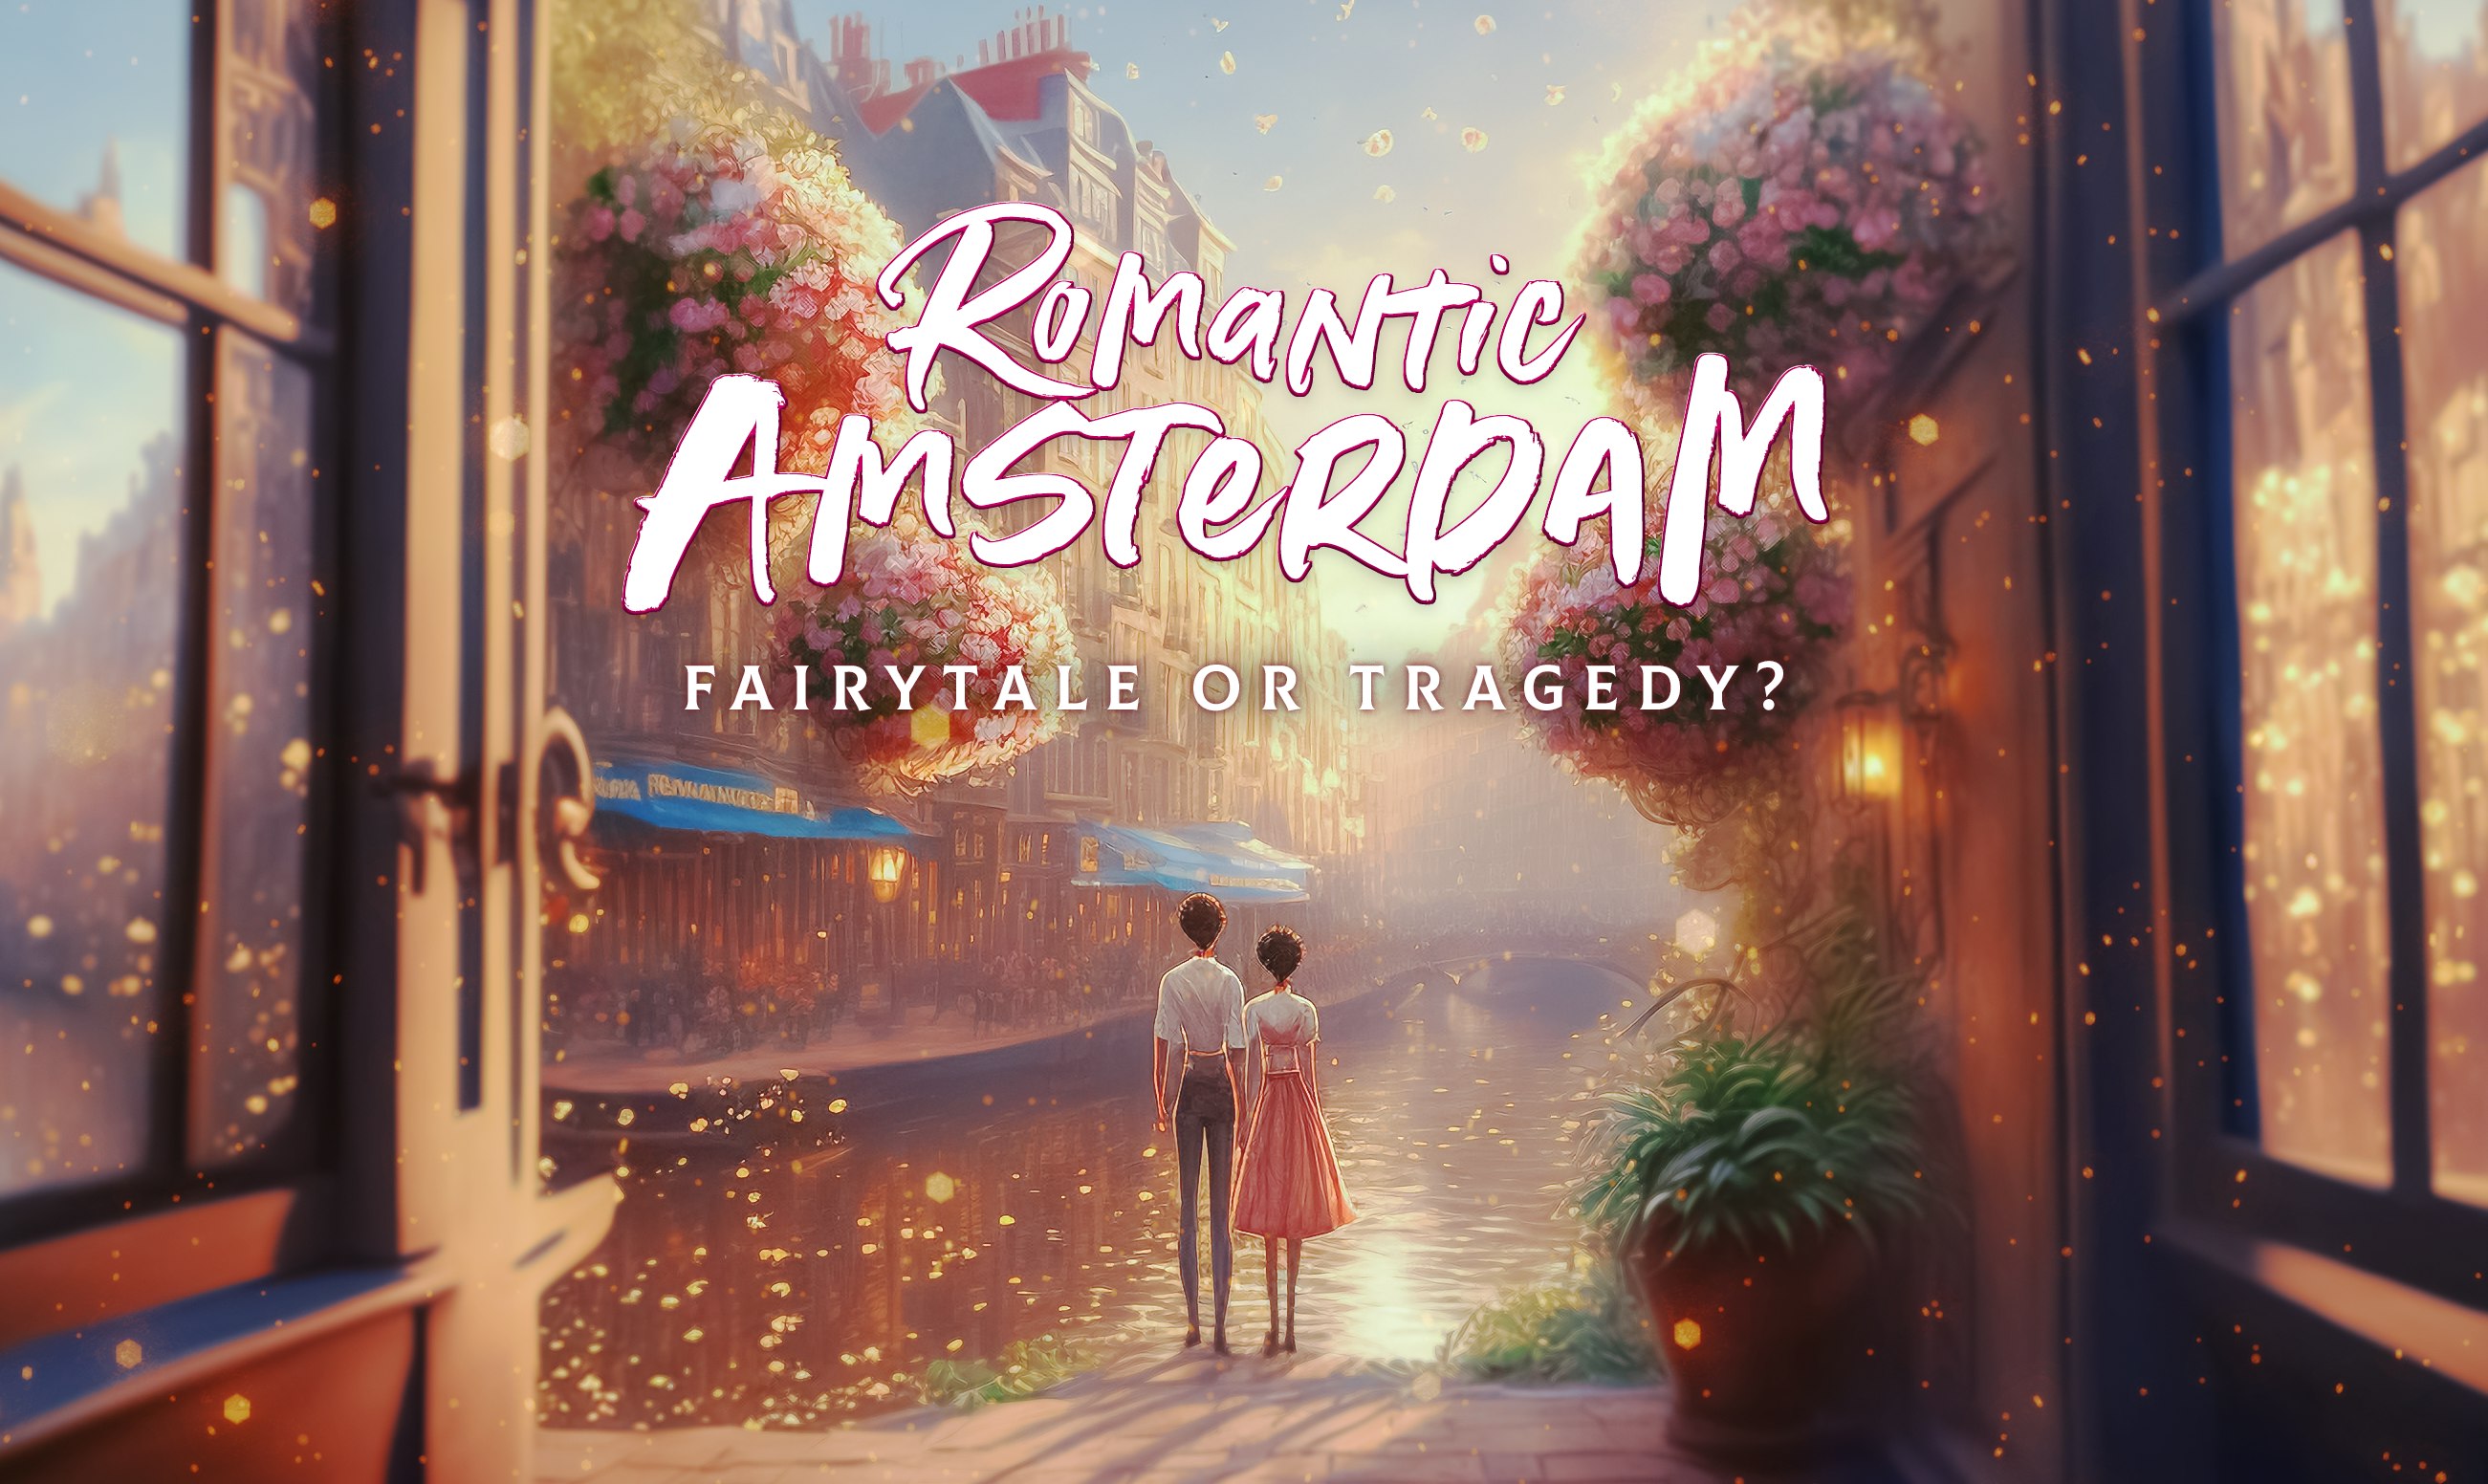 Romantic Highlights of Amsterdam: Fairytale or Tragedy?